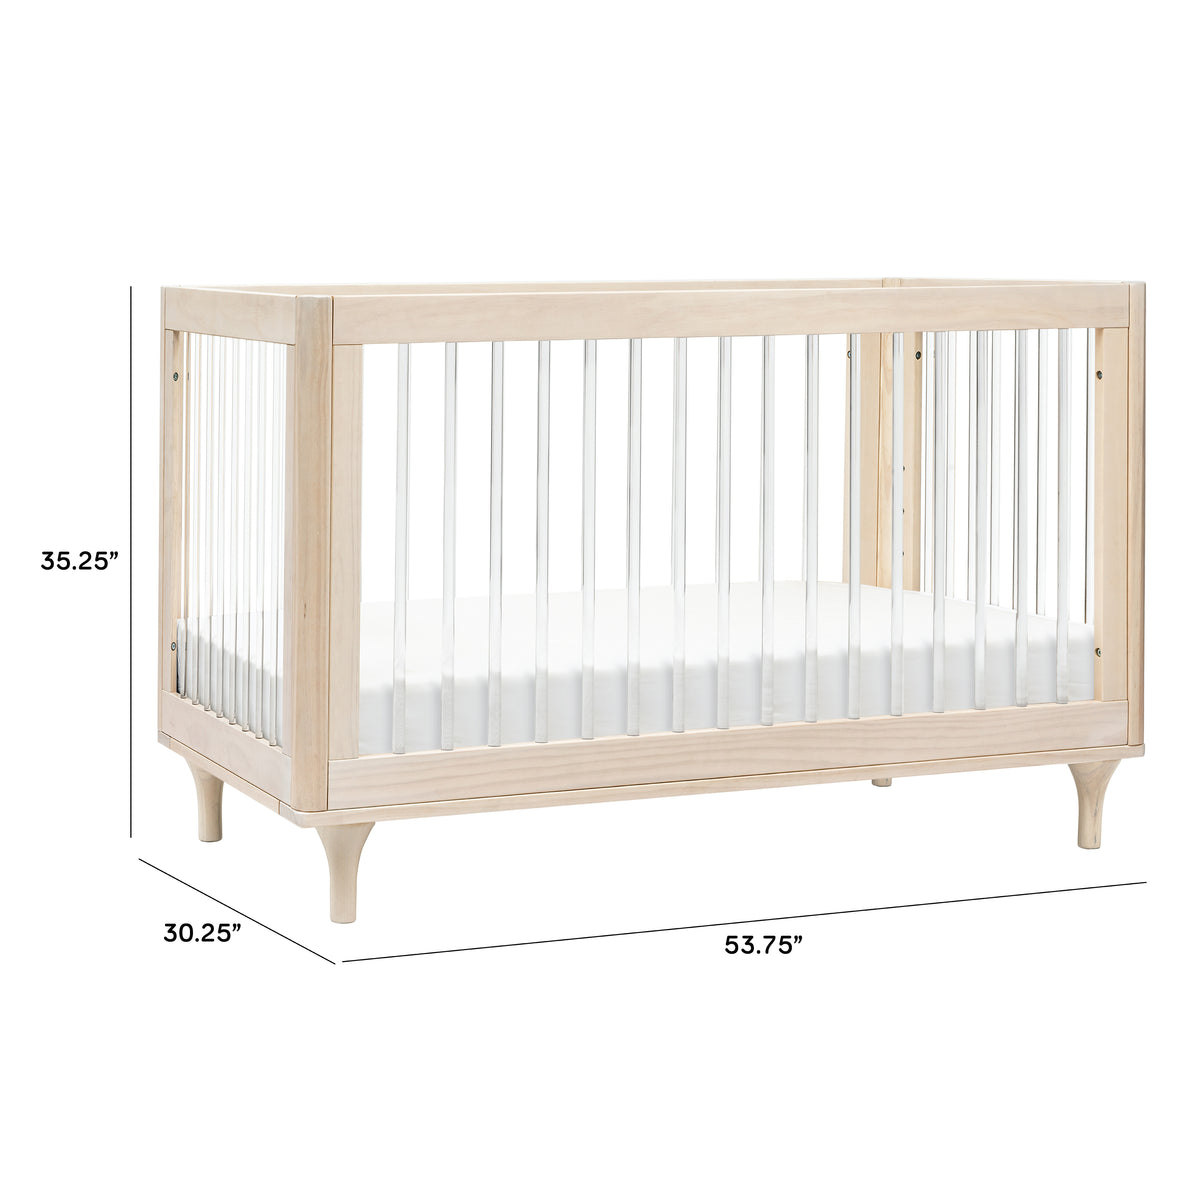 Lolly 3-in-1 Convertible Crib with Toddler Bed Conversion Kit - Washed Natural/Acrylic